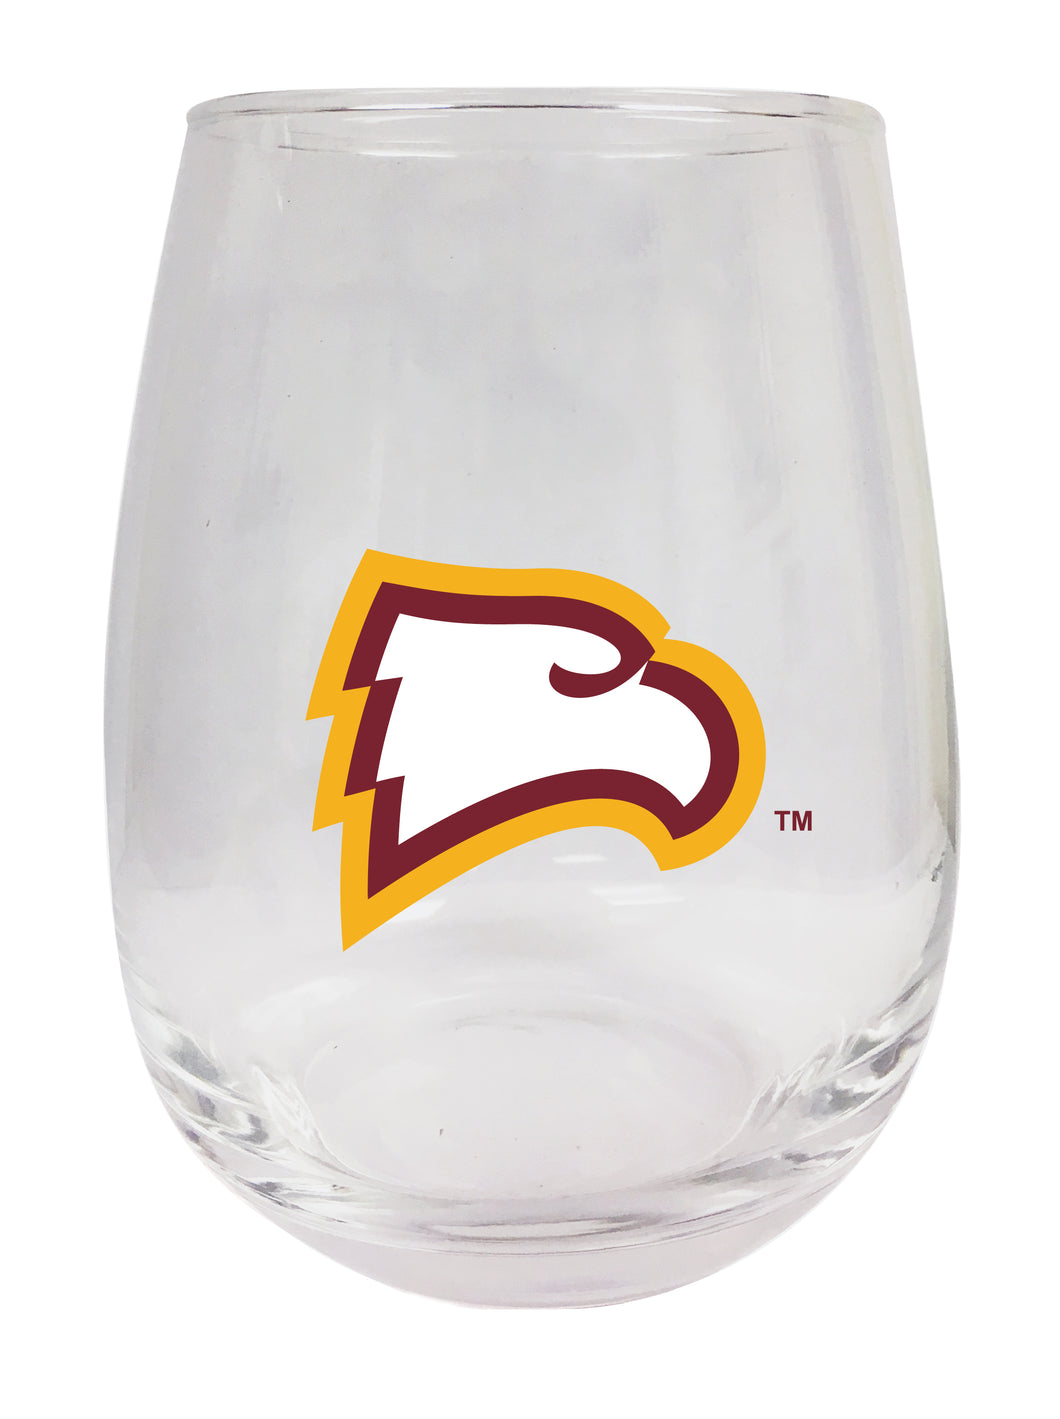 Winthrop University Stemless Wine Glass - 9 oz. | Officially Licensed NCAA Merchandise